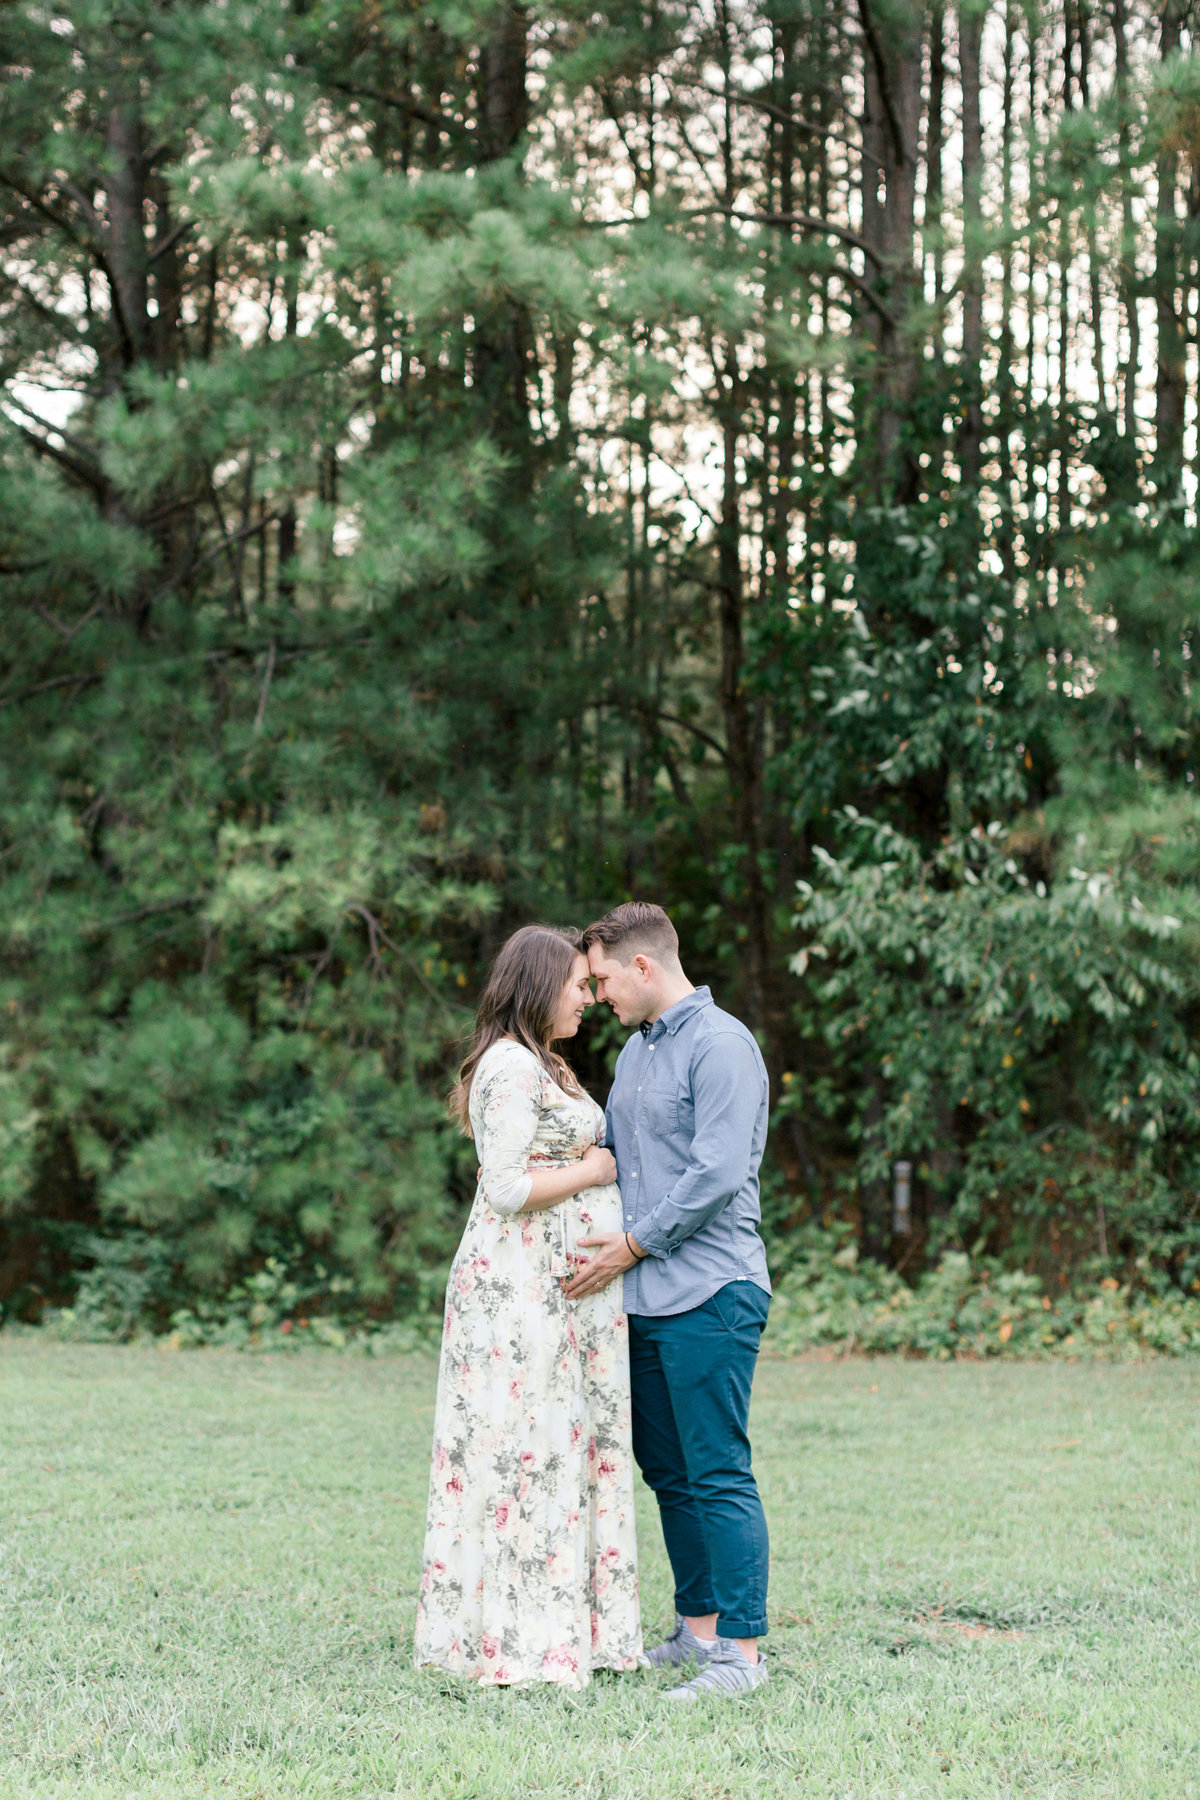 Dave and Emily-Maternity Session-Samantha Laffoon Photography-69